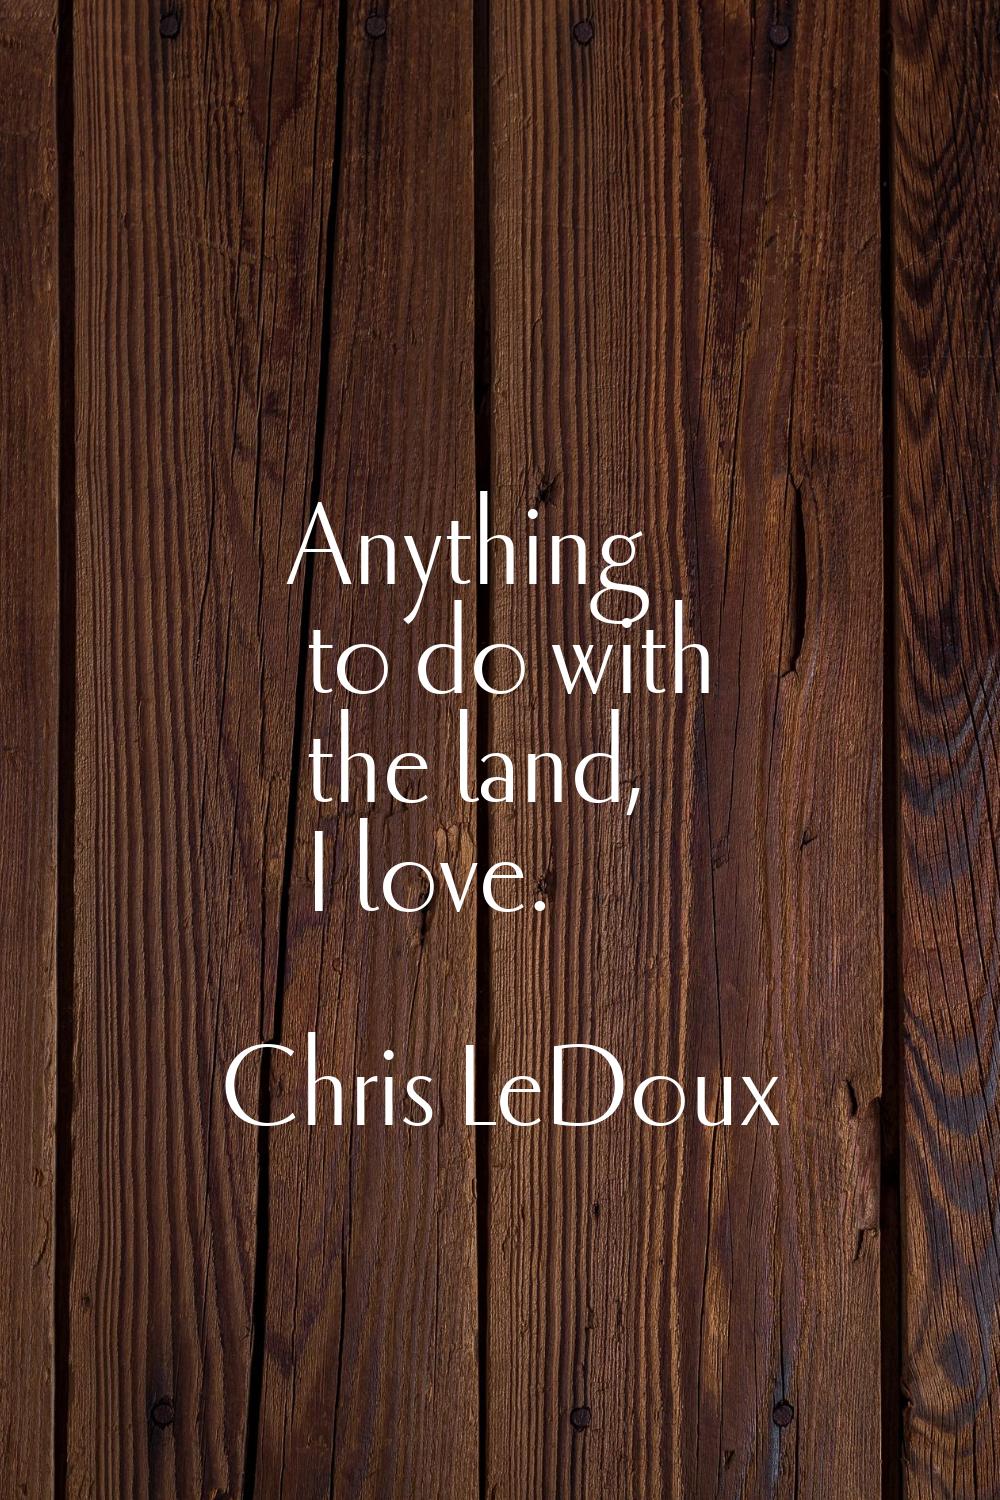 Anything to do with the land, I love.